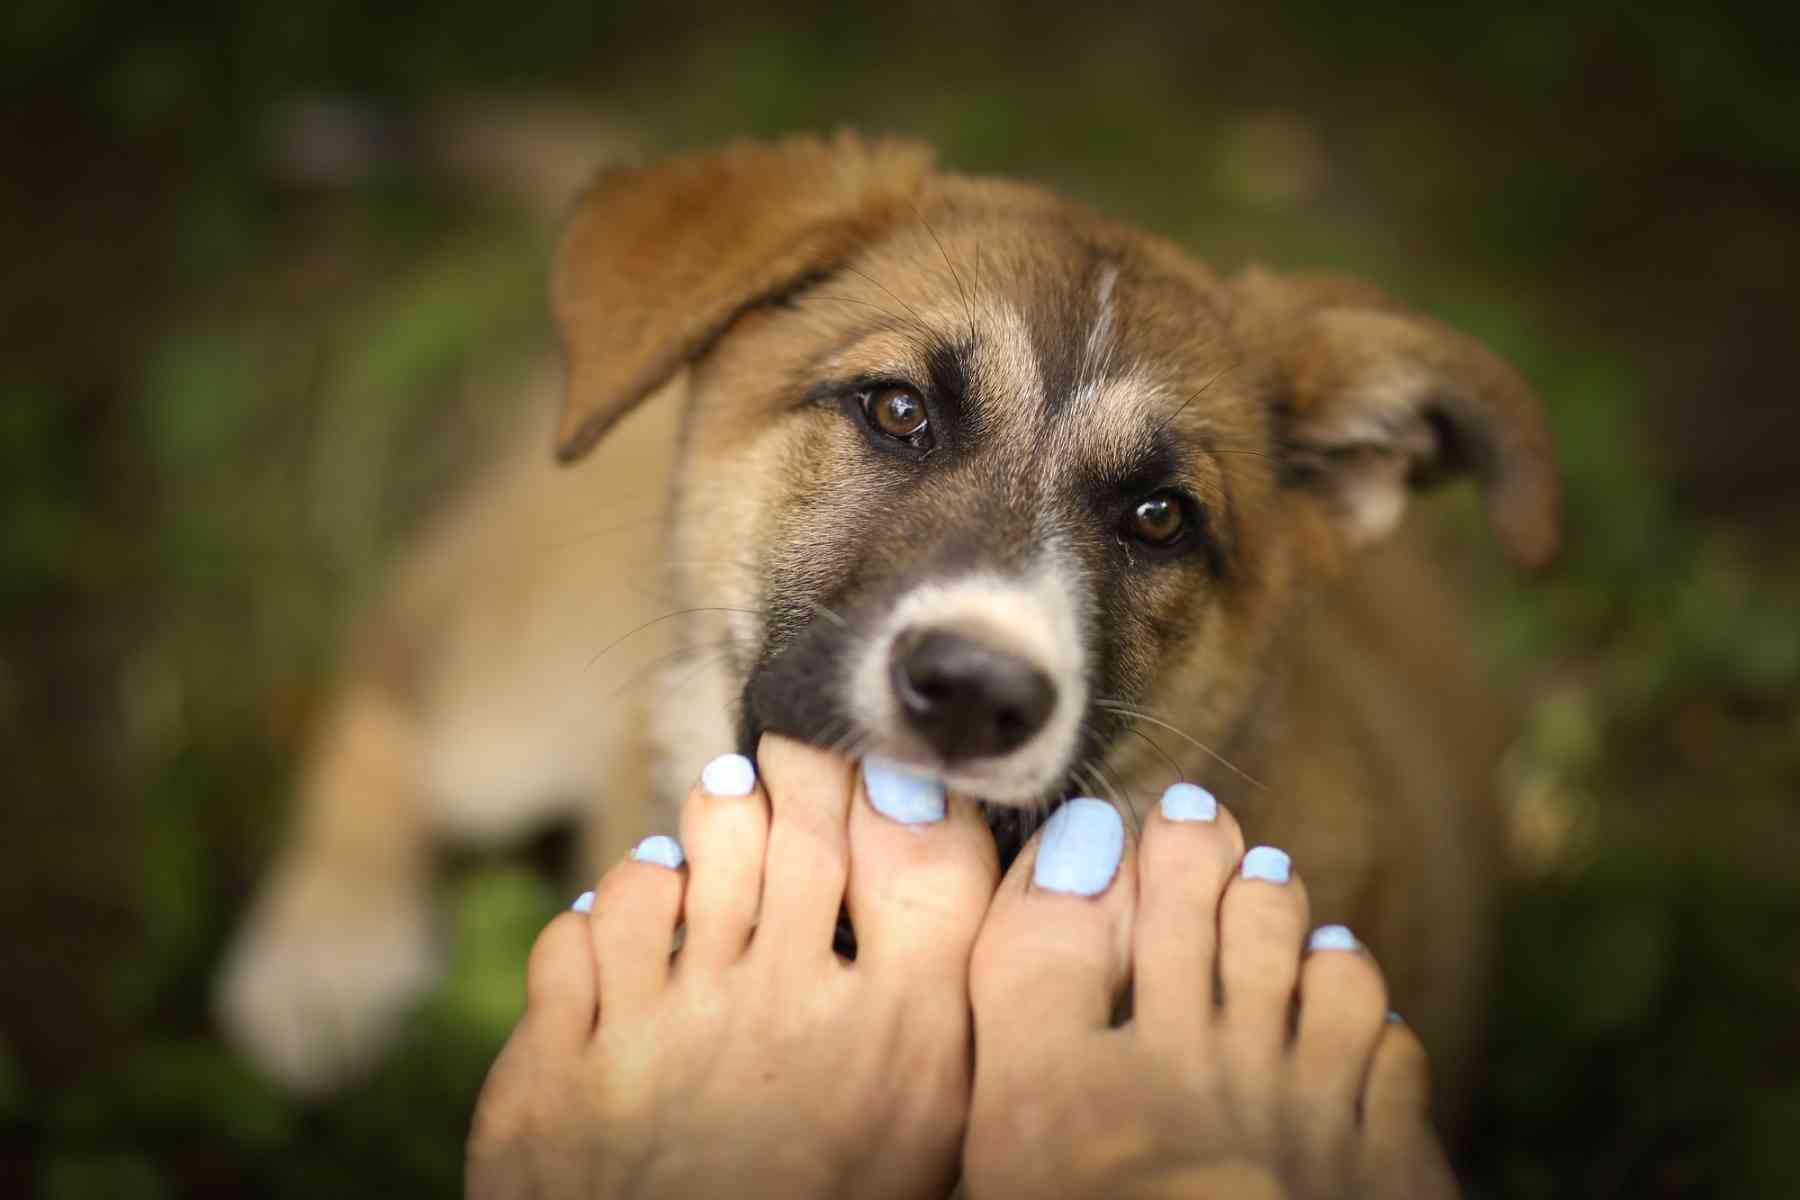 Cute puppy gently biting owner's feet